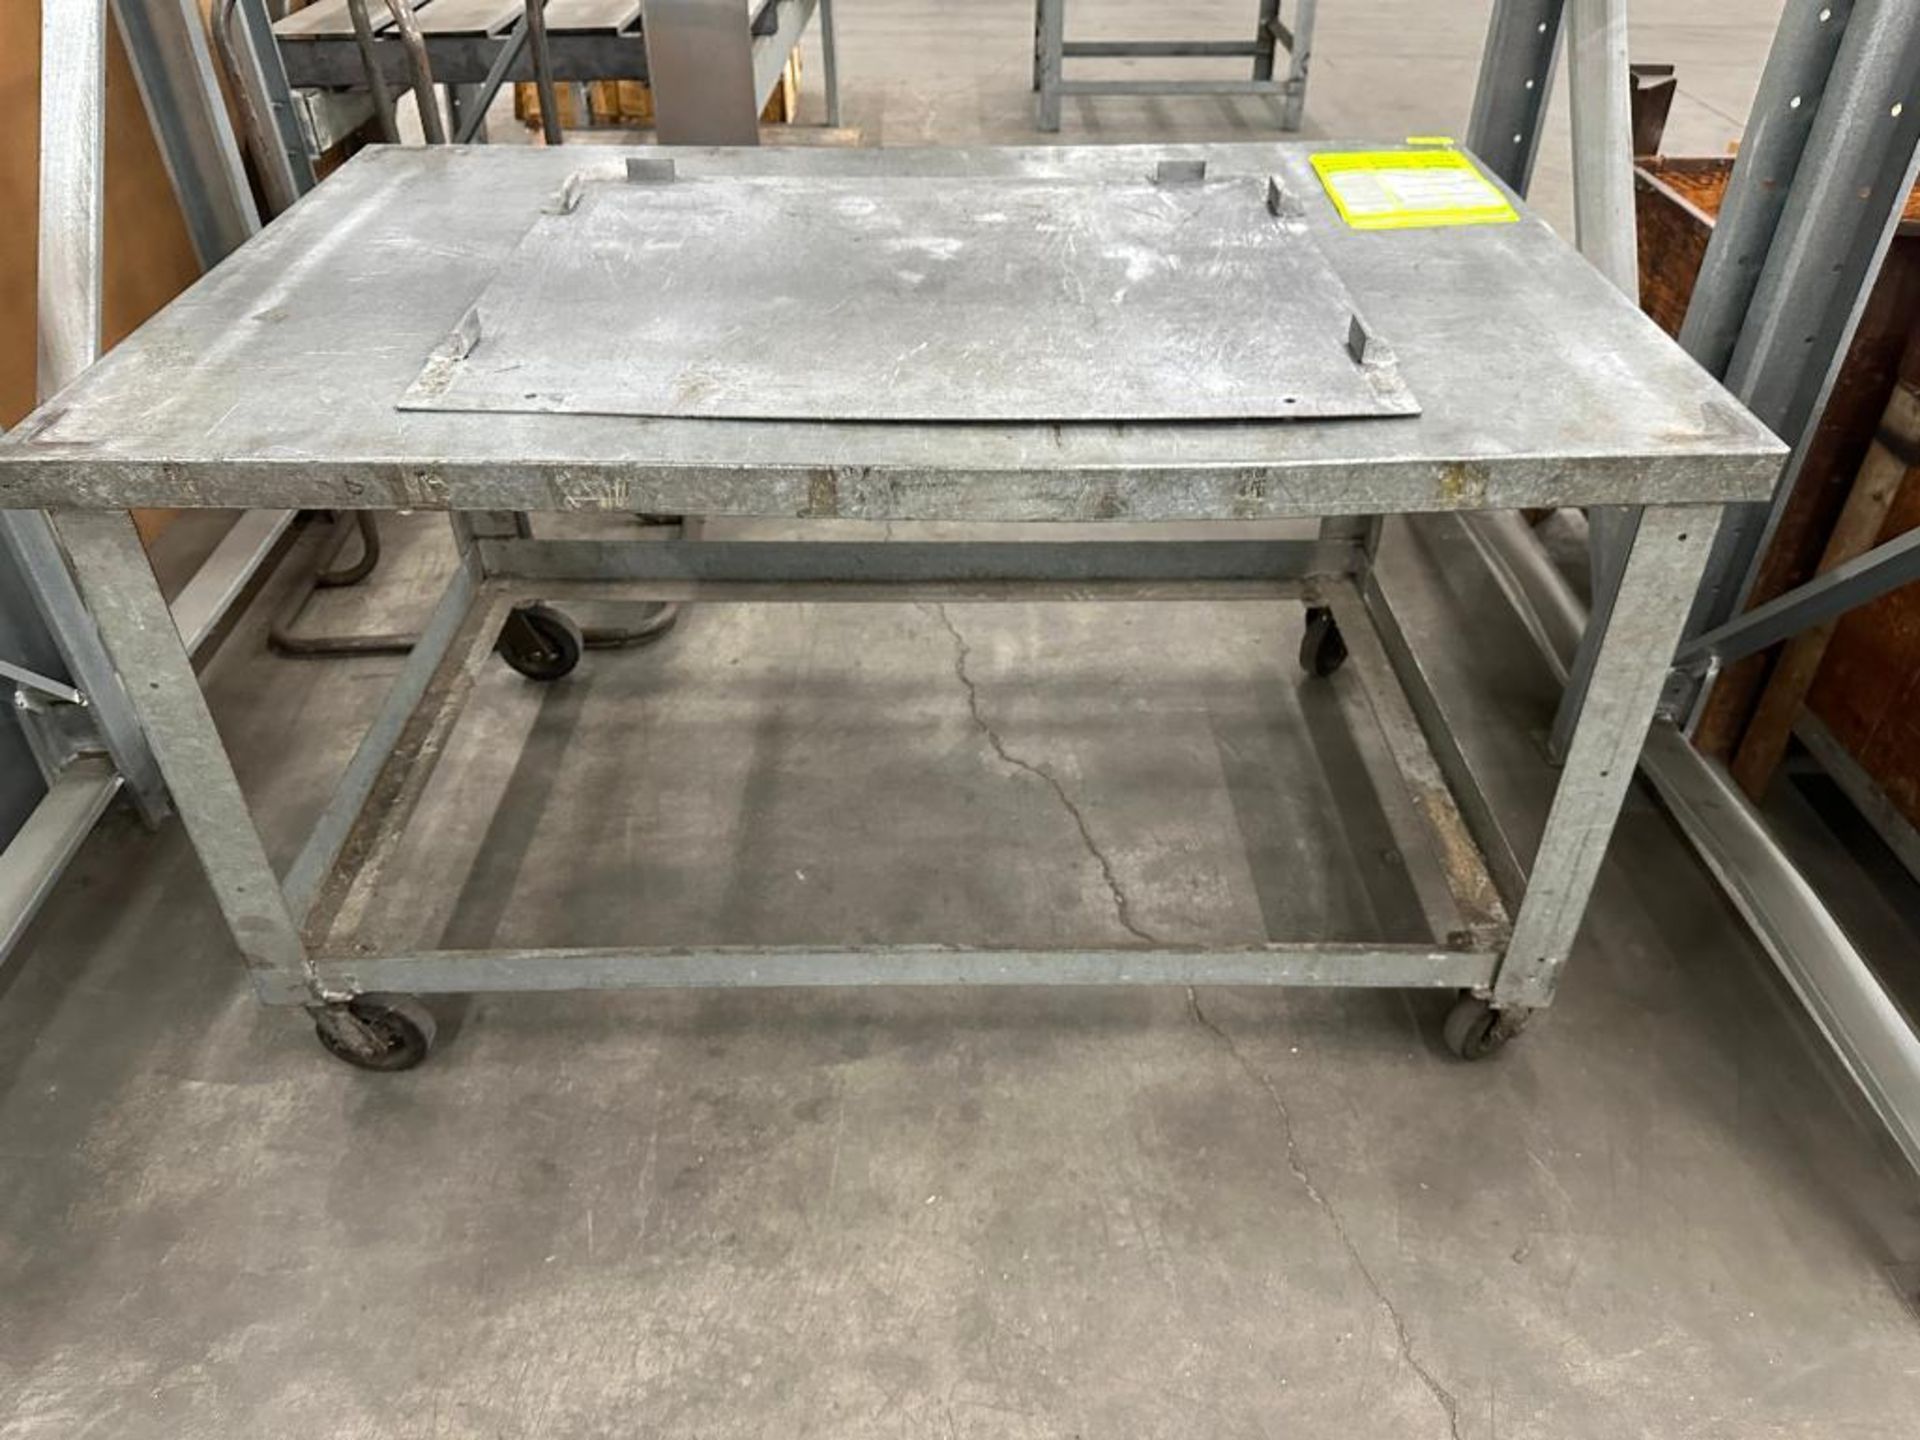 66" X 42" METAL FABRICATION TABLE ON CASTERS